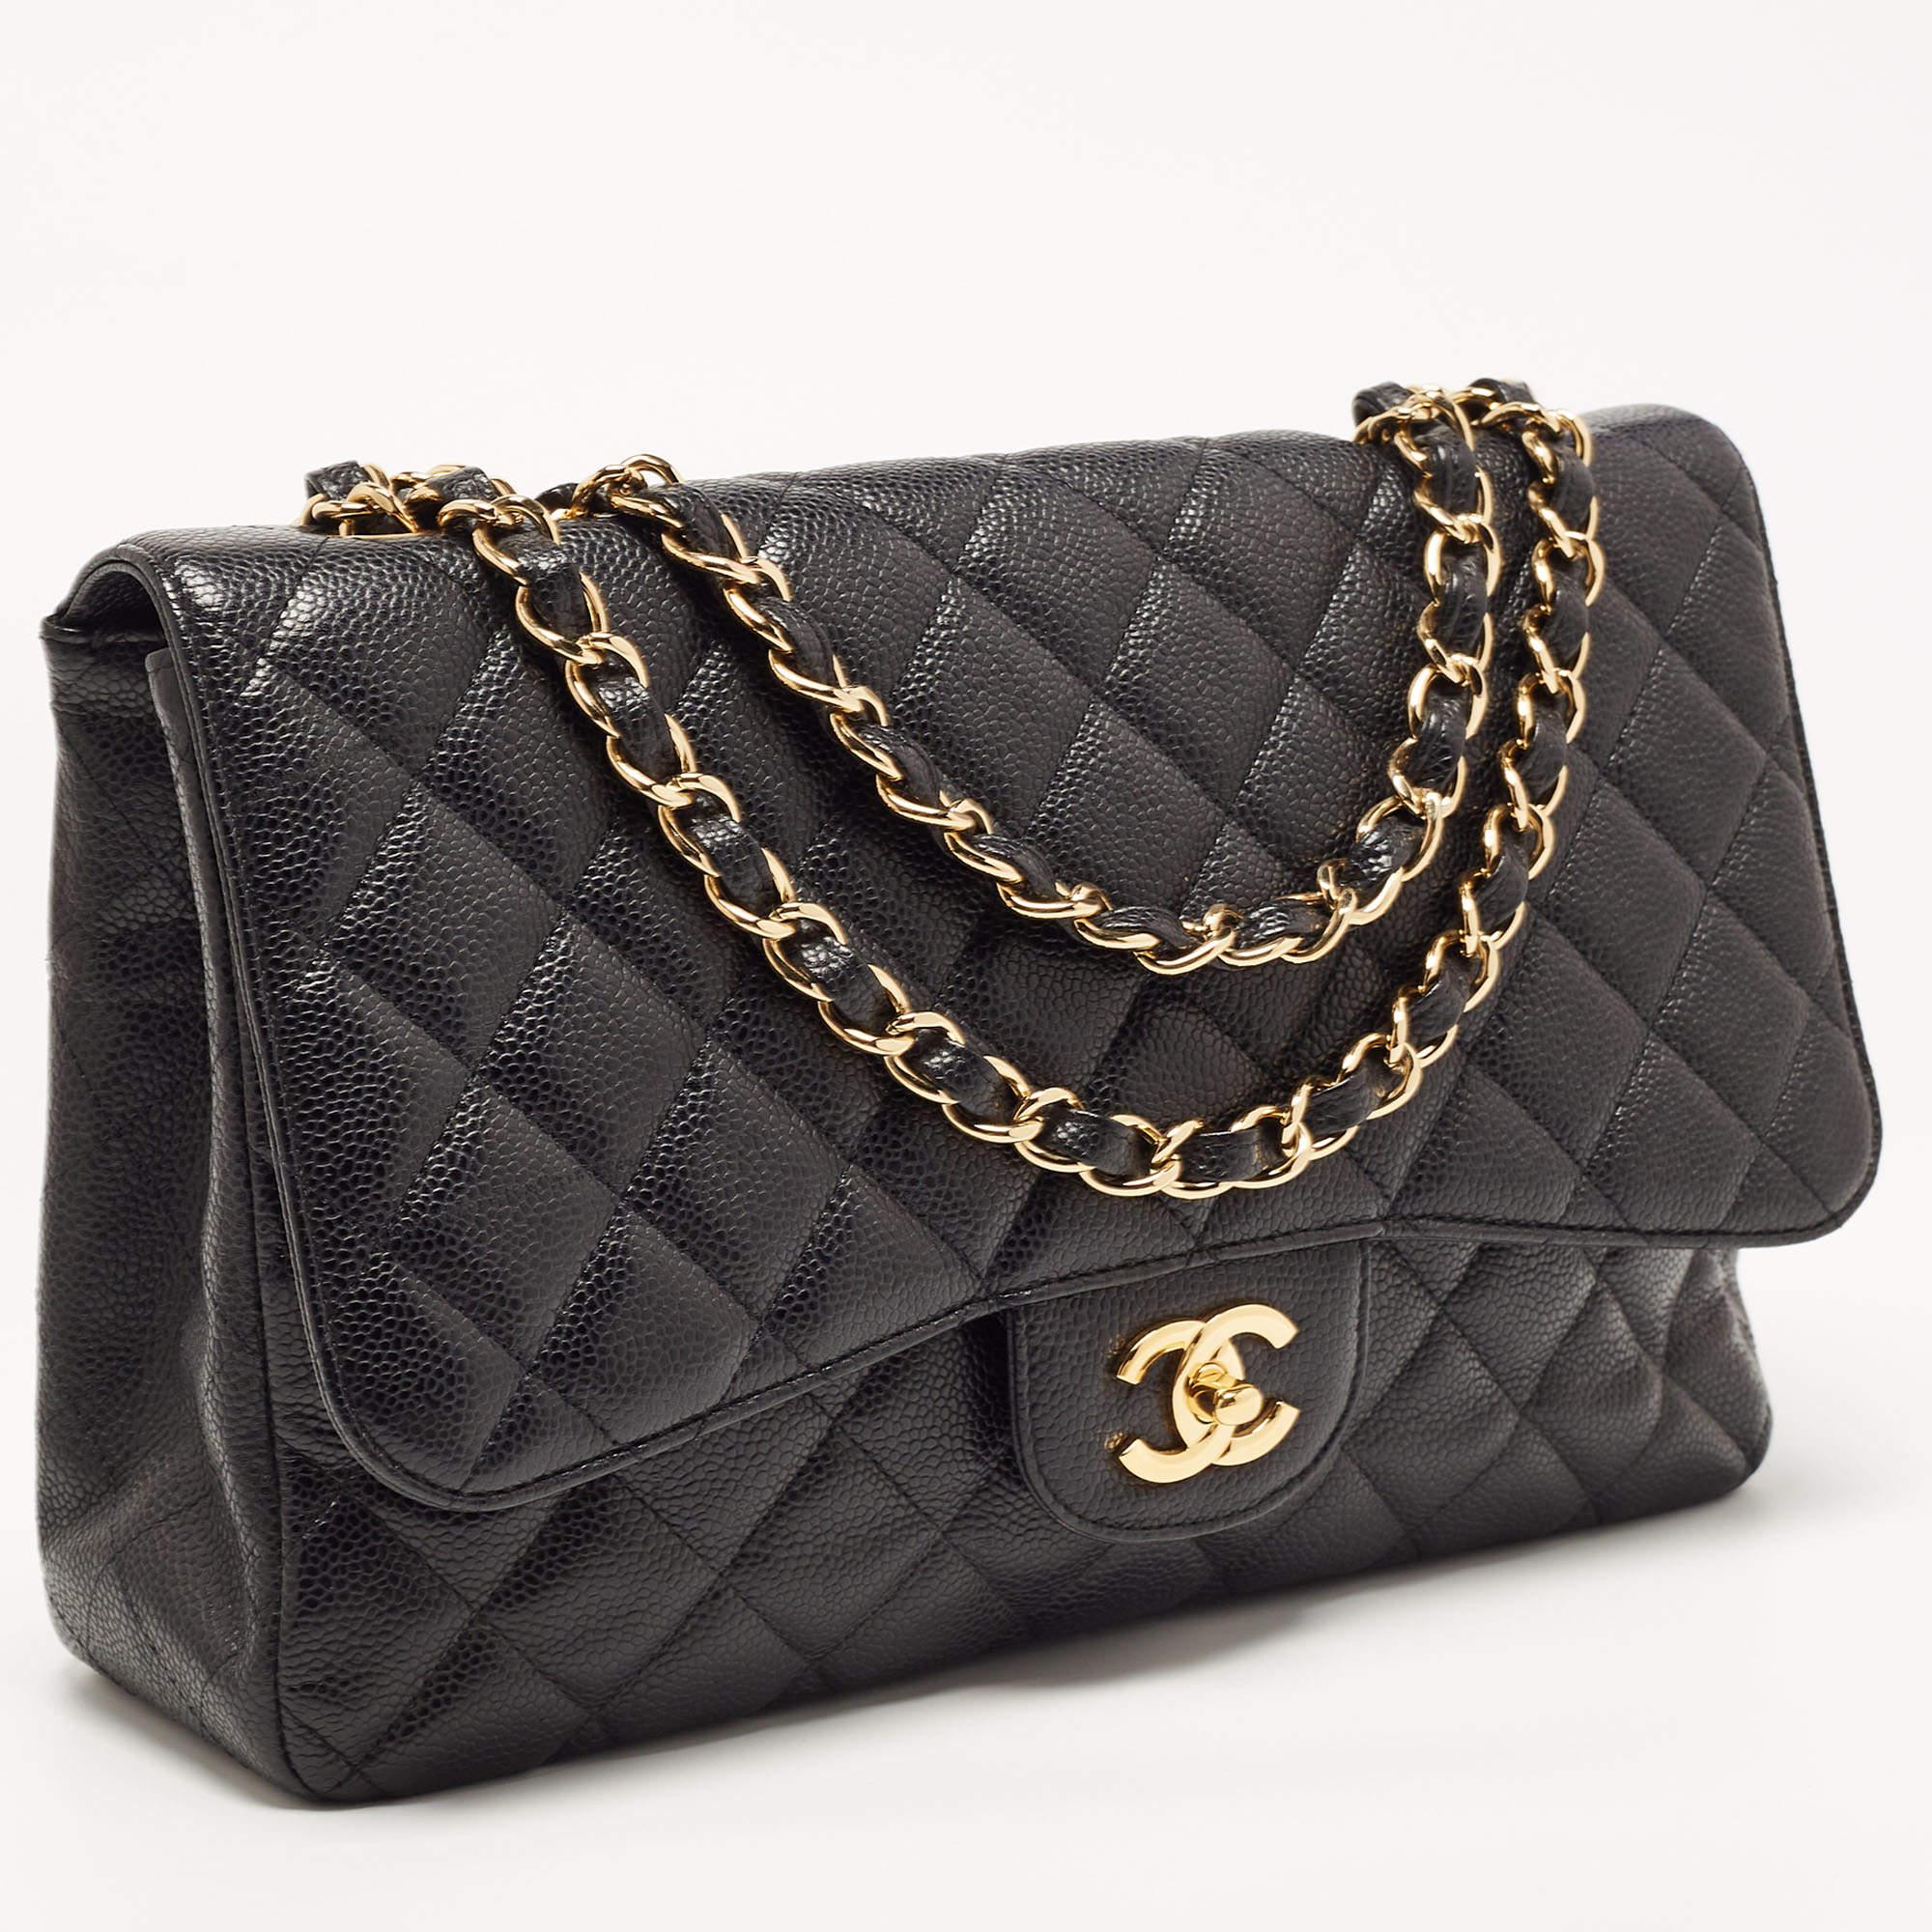 Women's Chanel Black Quilted Caviar Leather Large Classic Double Flap Bag